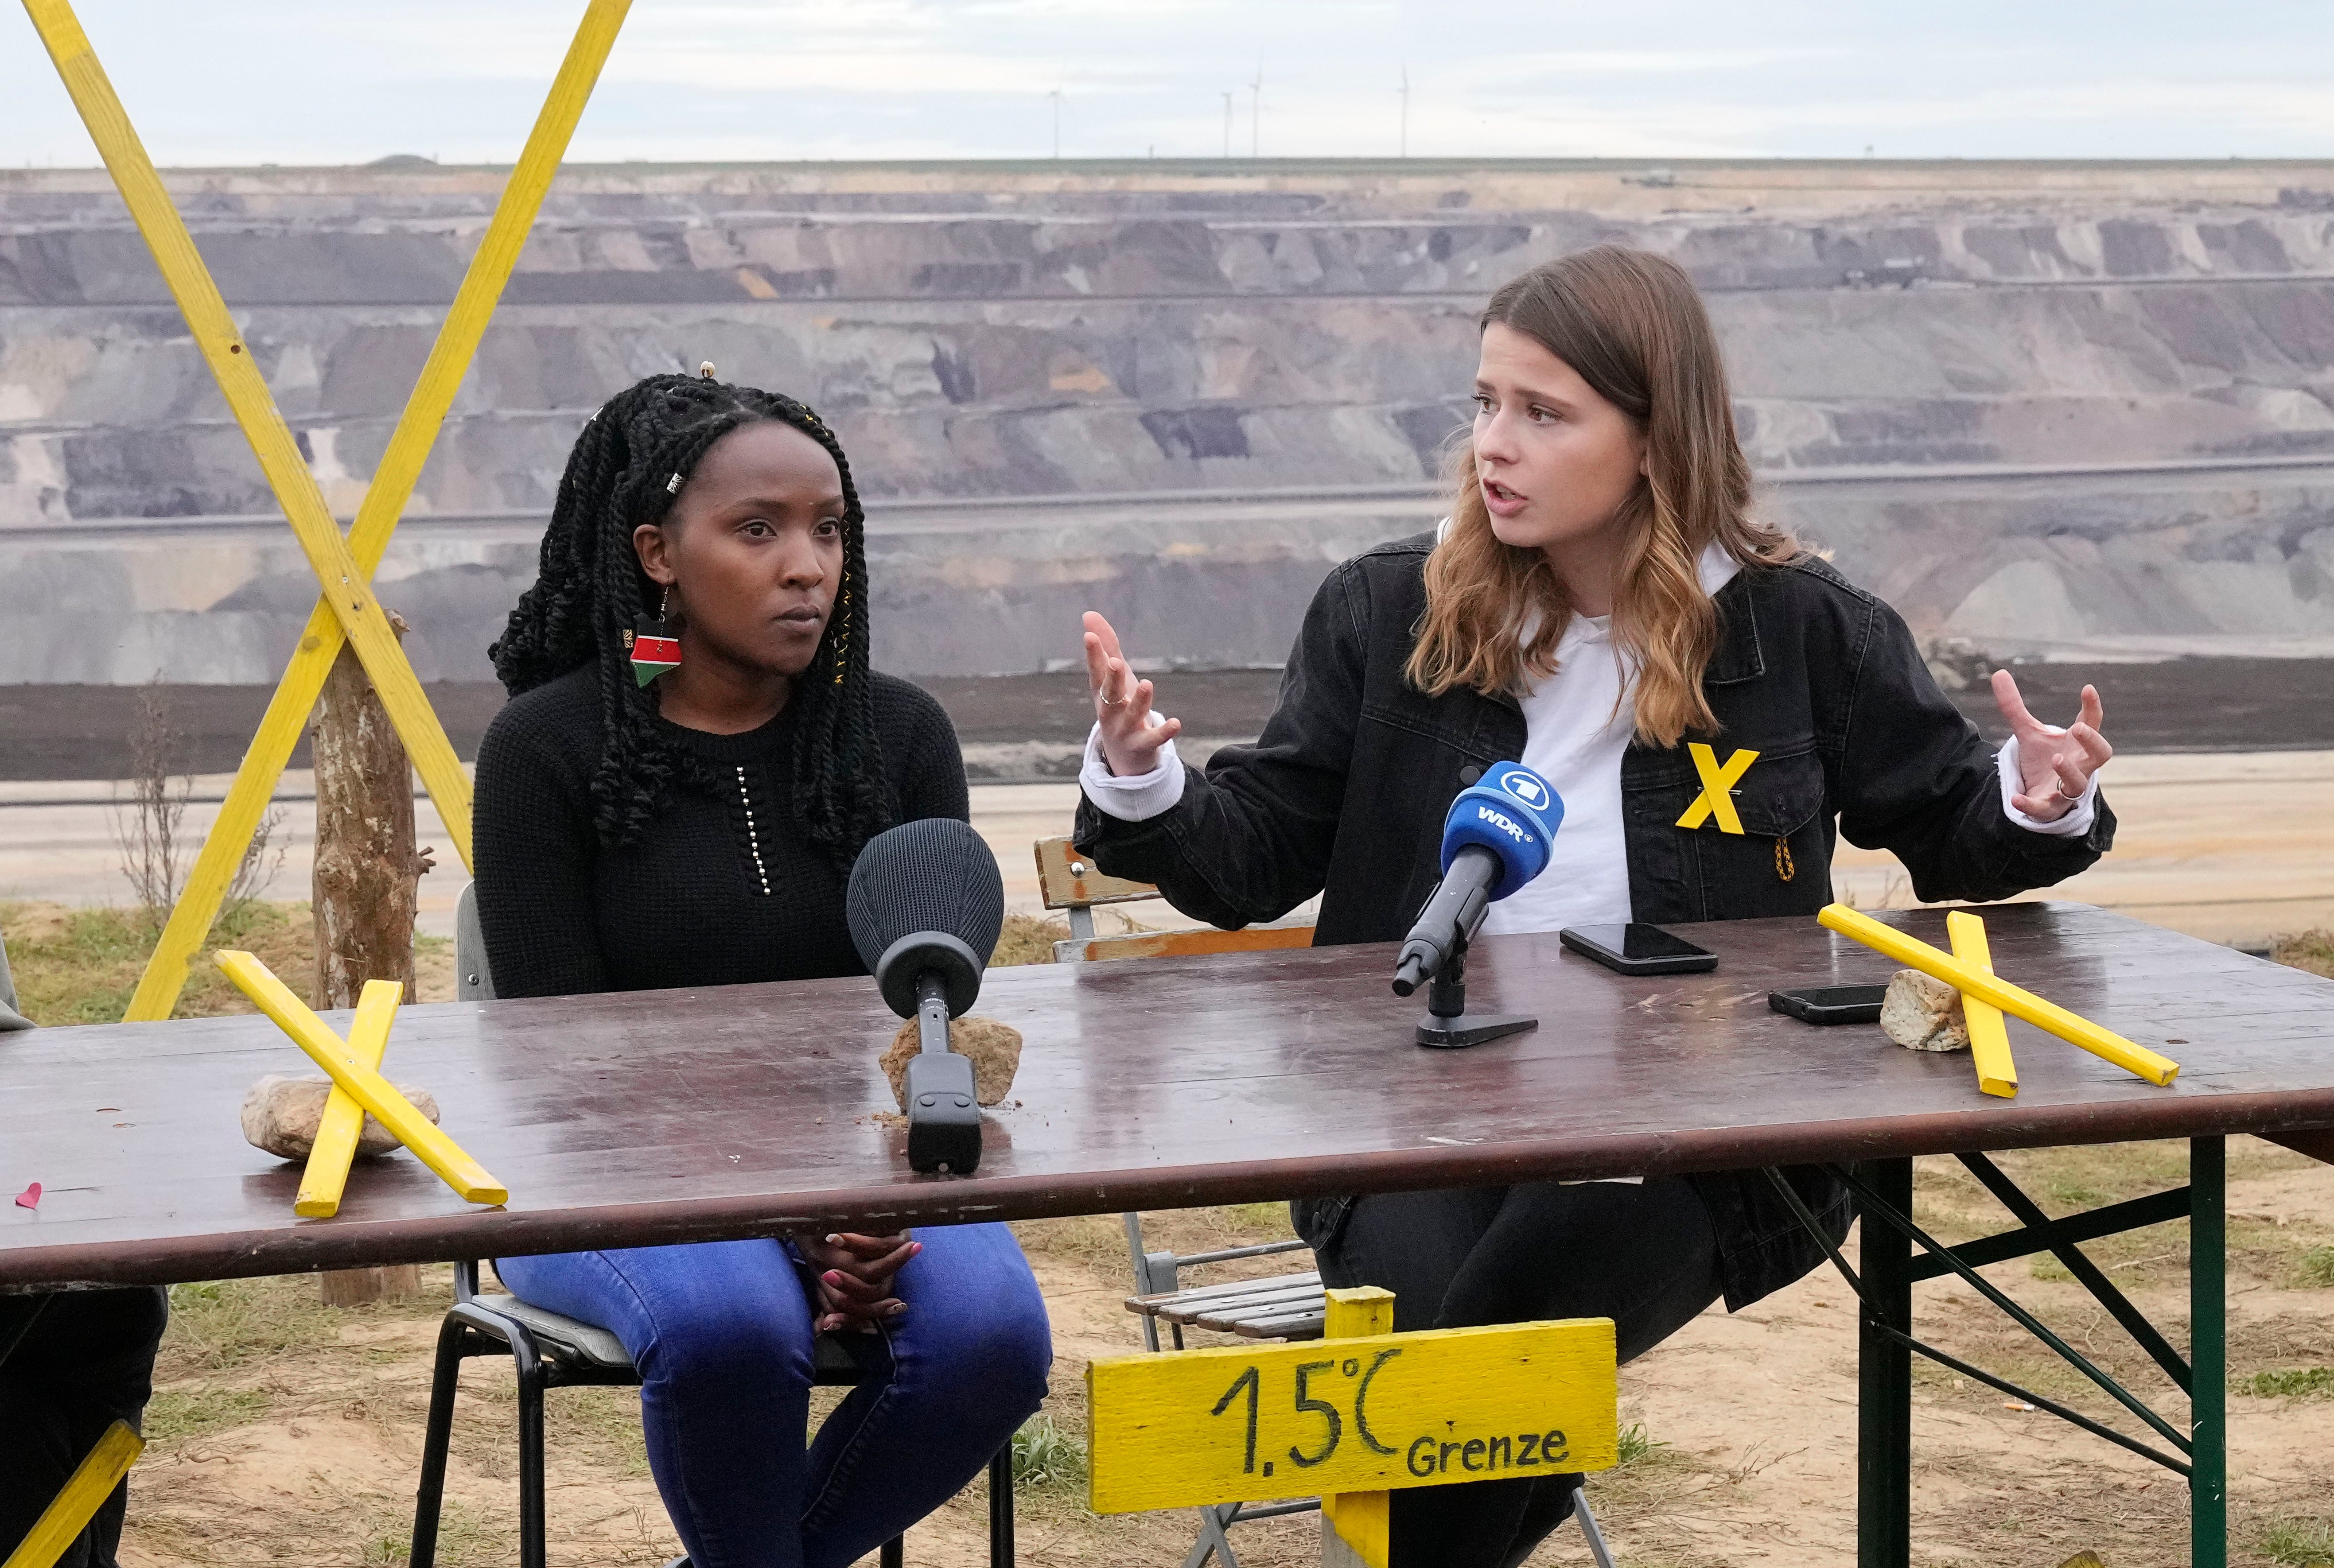 Elizabeth Wathuti (right) with fellow activist Luisa Neubauer at a news conference at the Garzweiler open-cast coal mine near Luetzerath, western Germany, in October